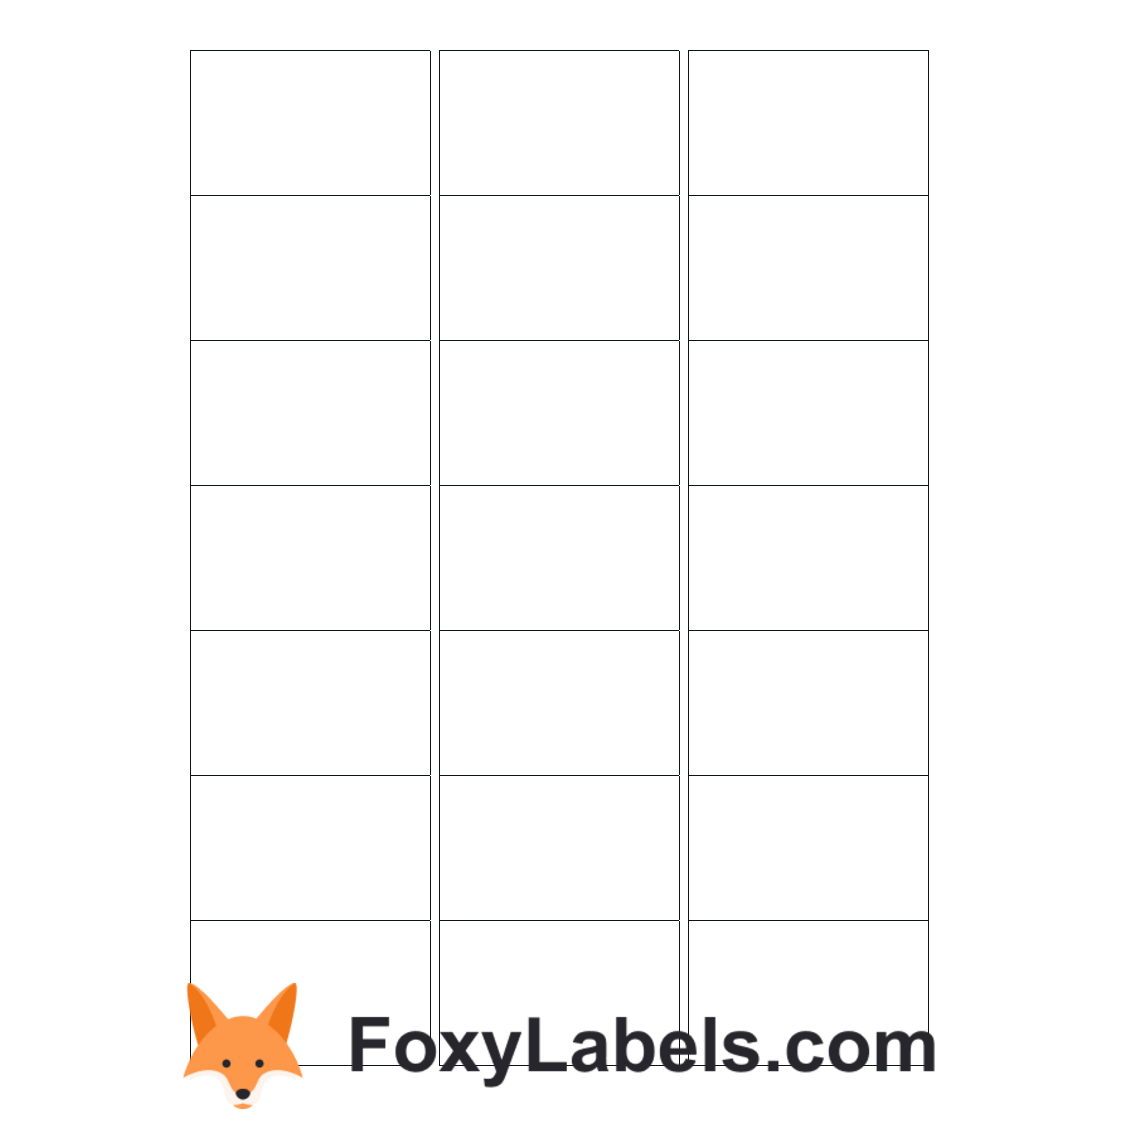 Avery J8560 label template for Google Docs